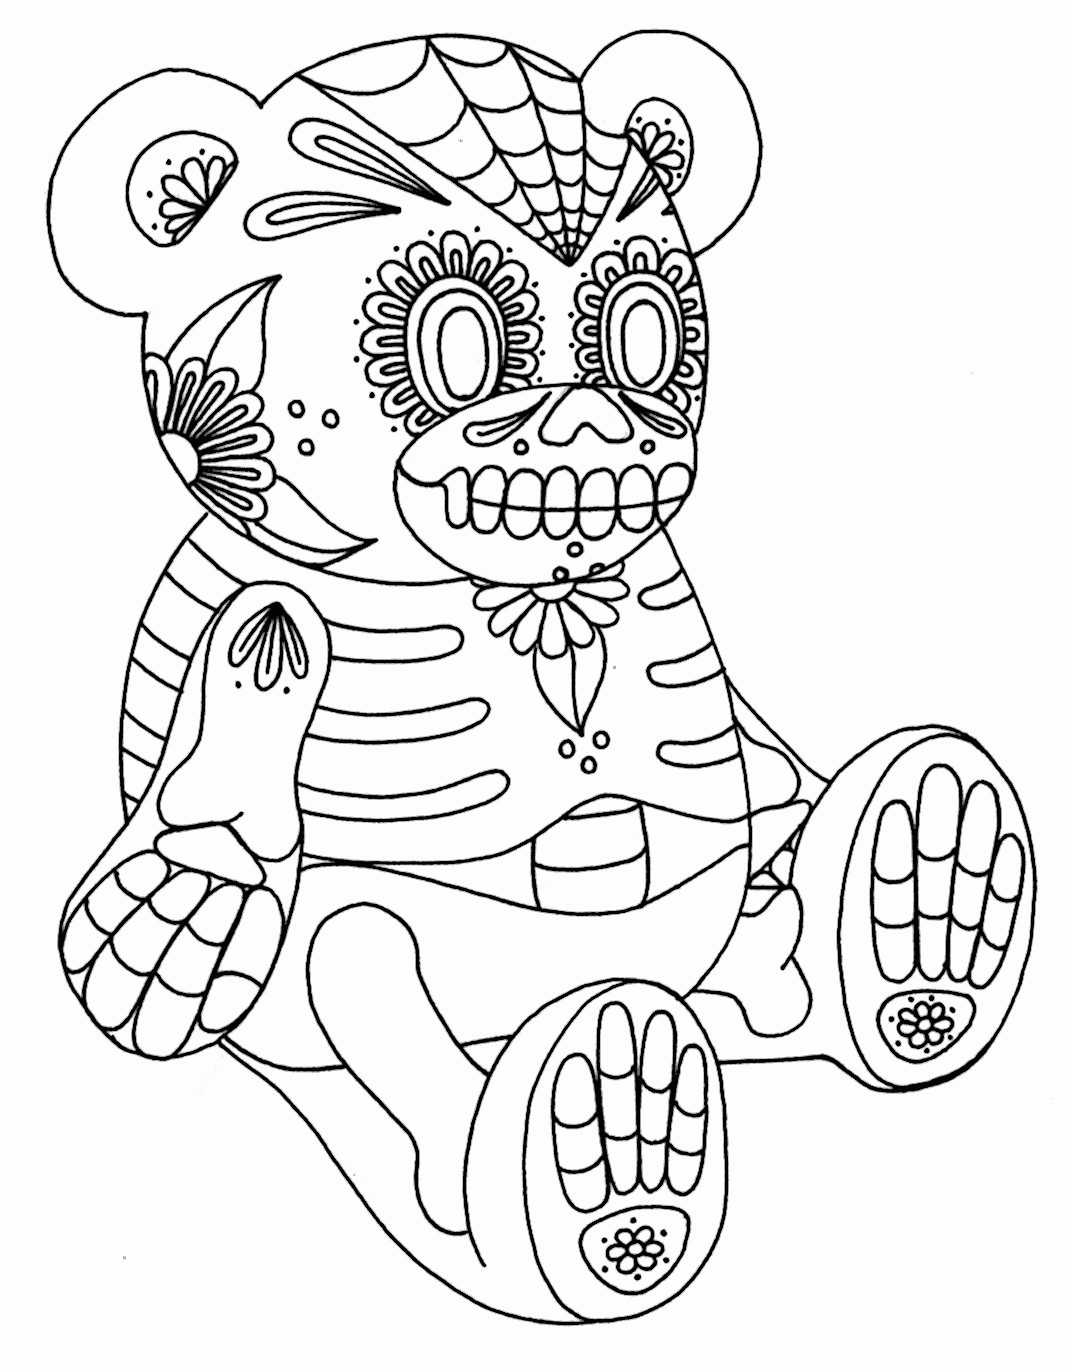 Sugar Skull Coloring Pages Download - Coloring Home